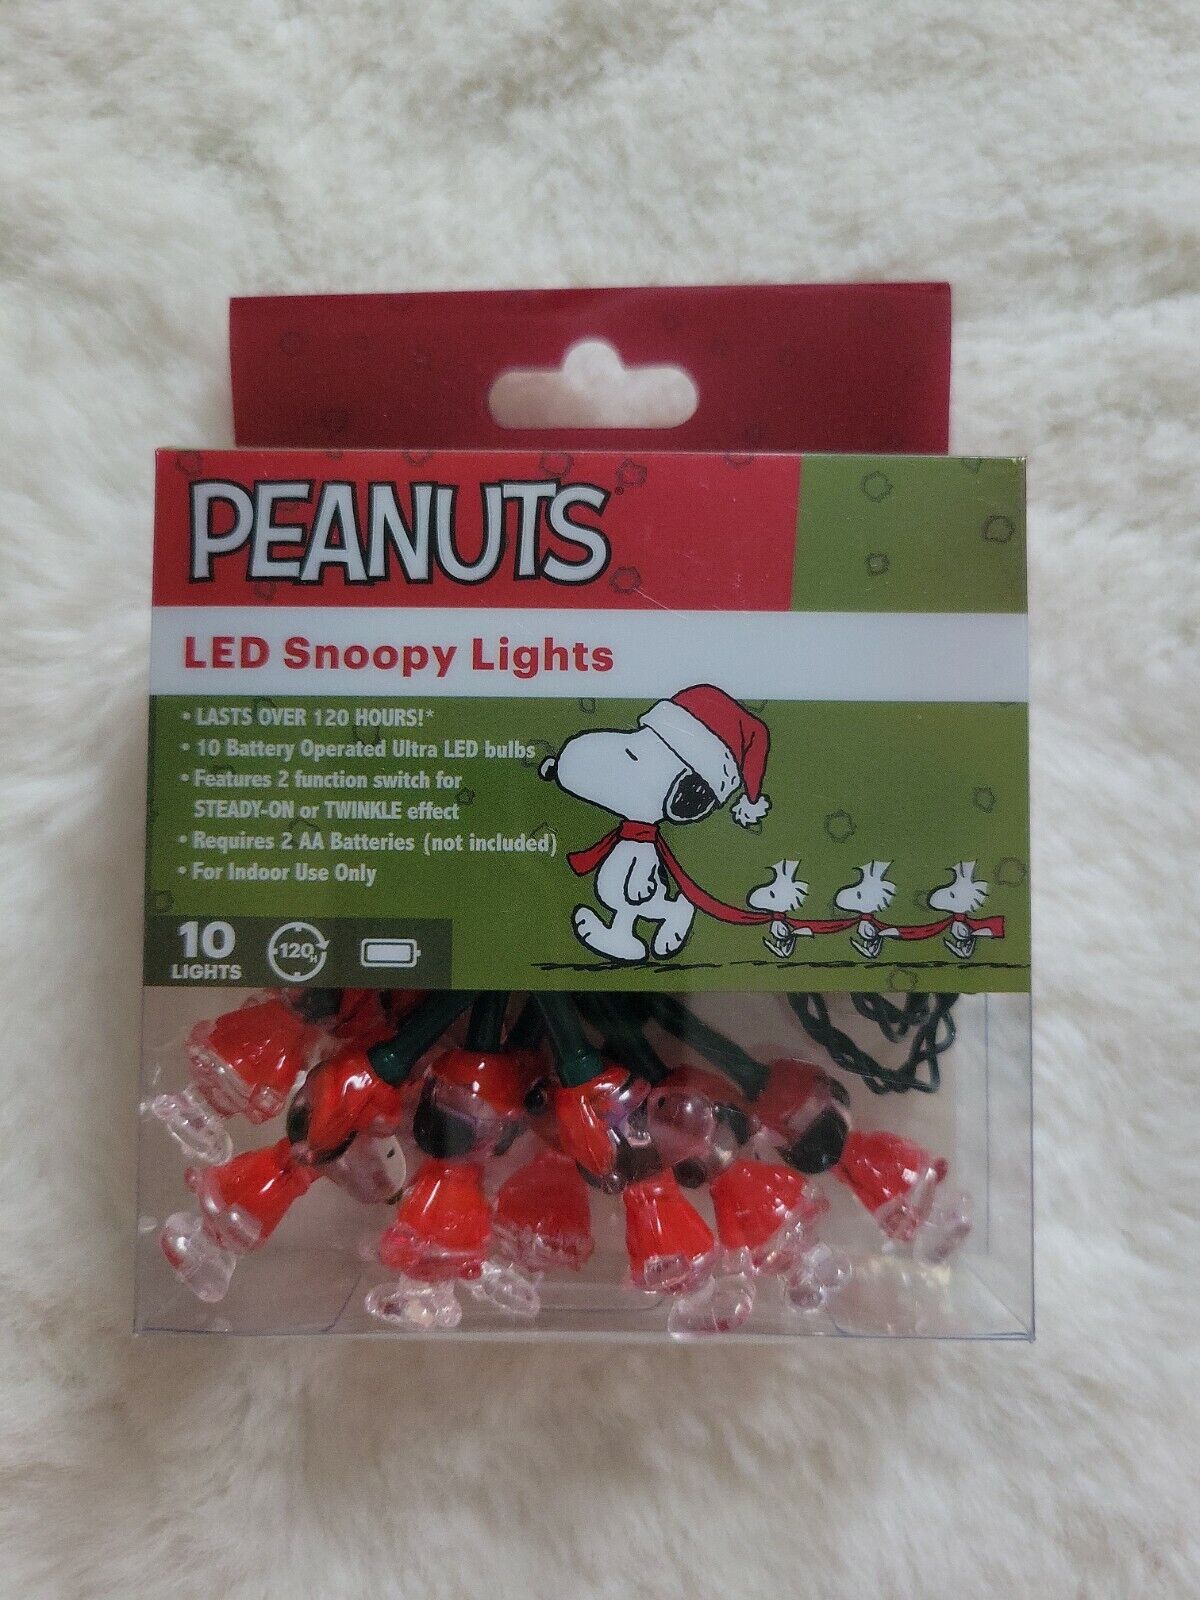 Peanuts LED Snoopy Lights - Brand New - Fast Shipping 🎄